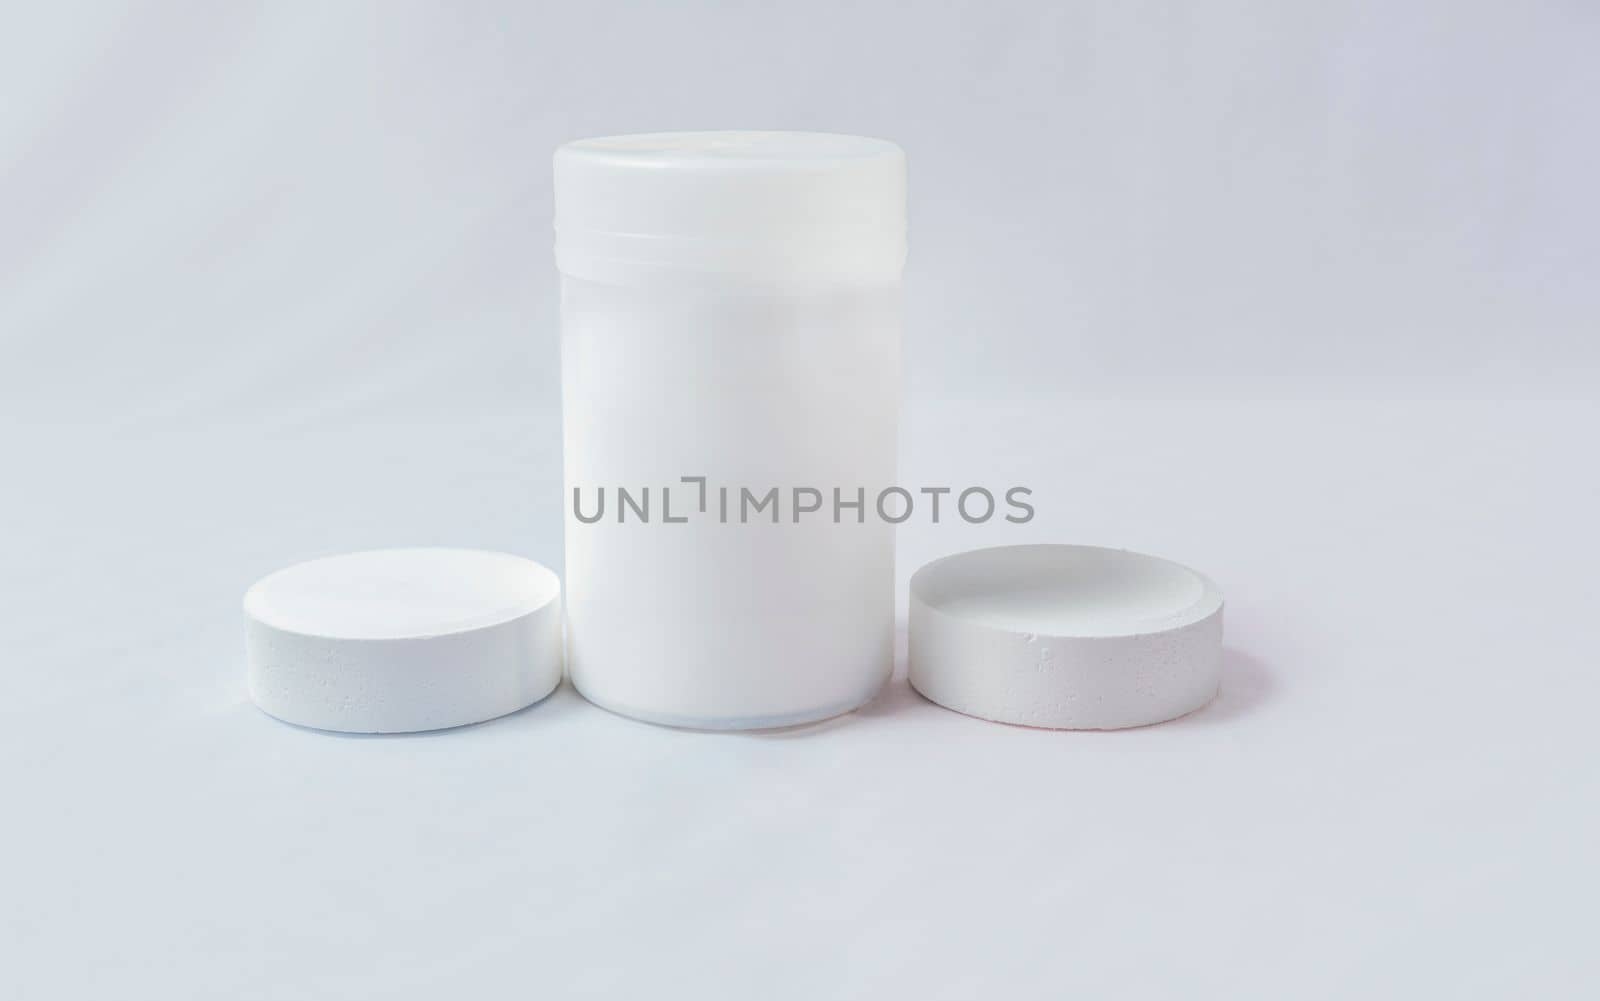 Swimming pool cleaning and maintenance chlorine tablets. Chlorine tablets for pool cleaning on isolated background. Chlorine tablets for swimming pool disinfection on white background